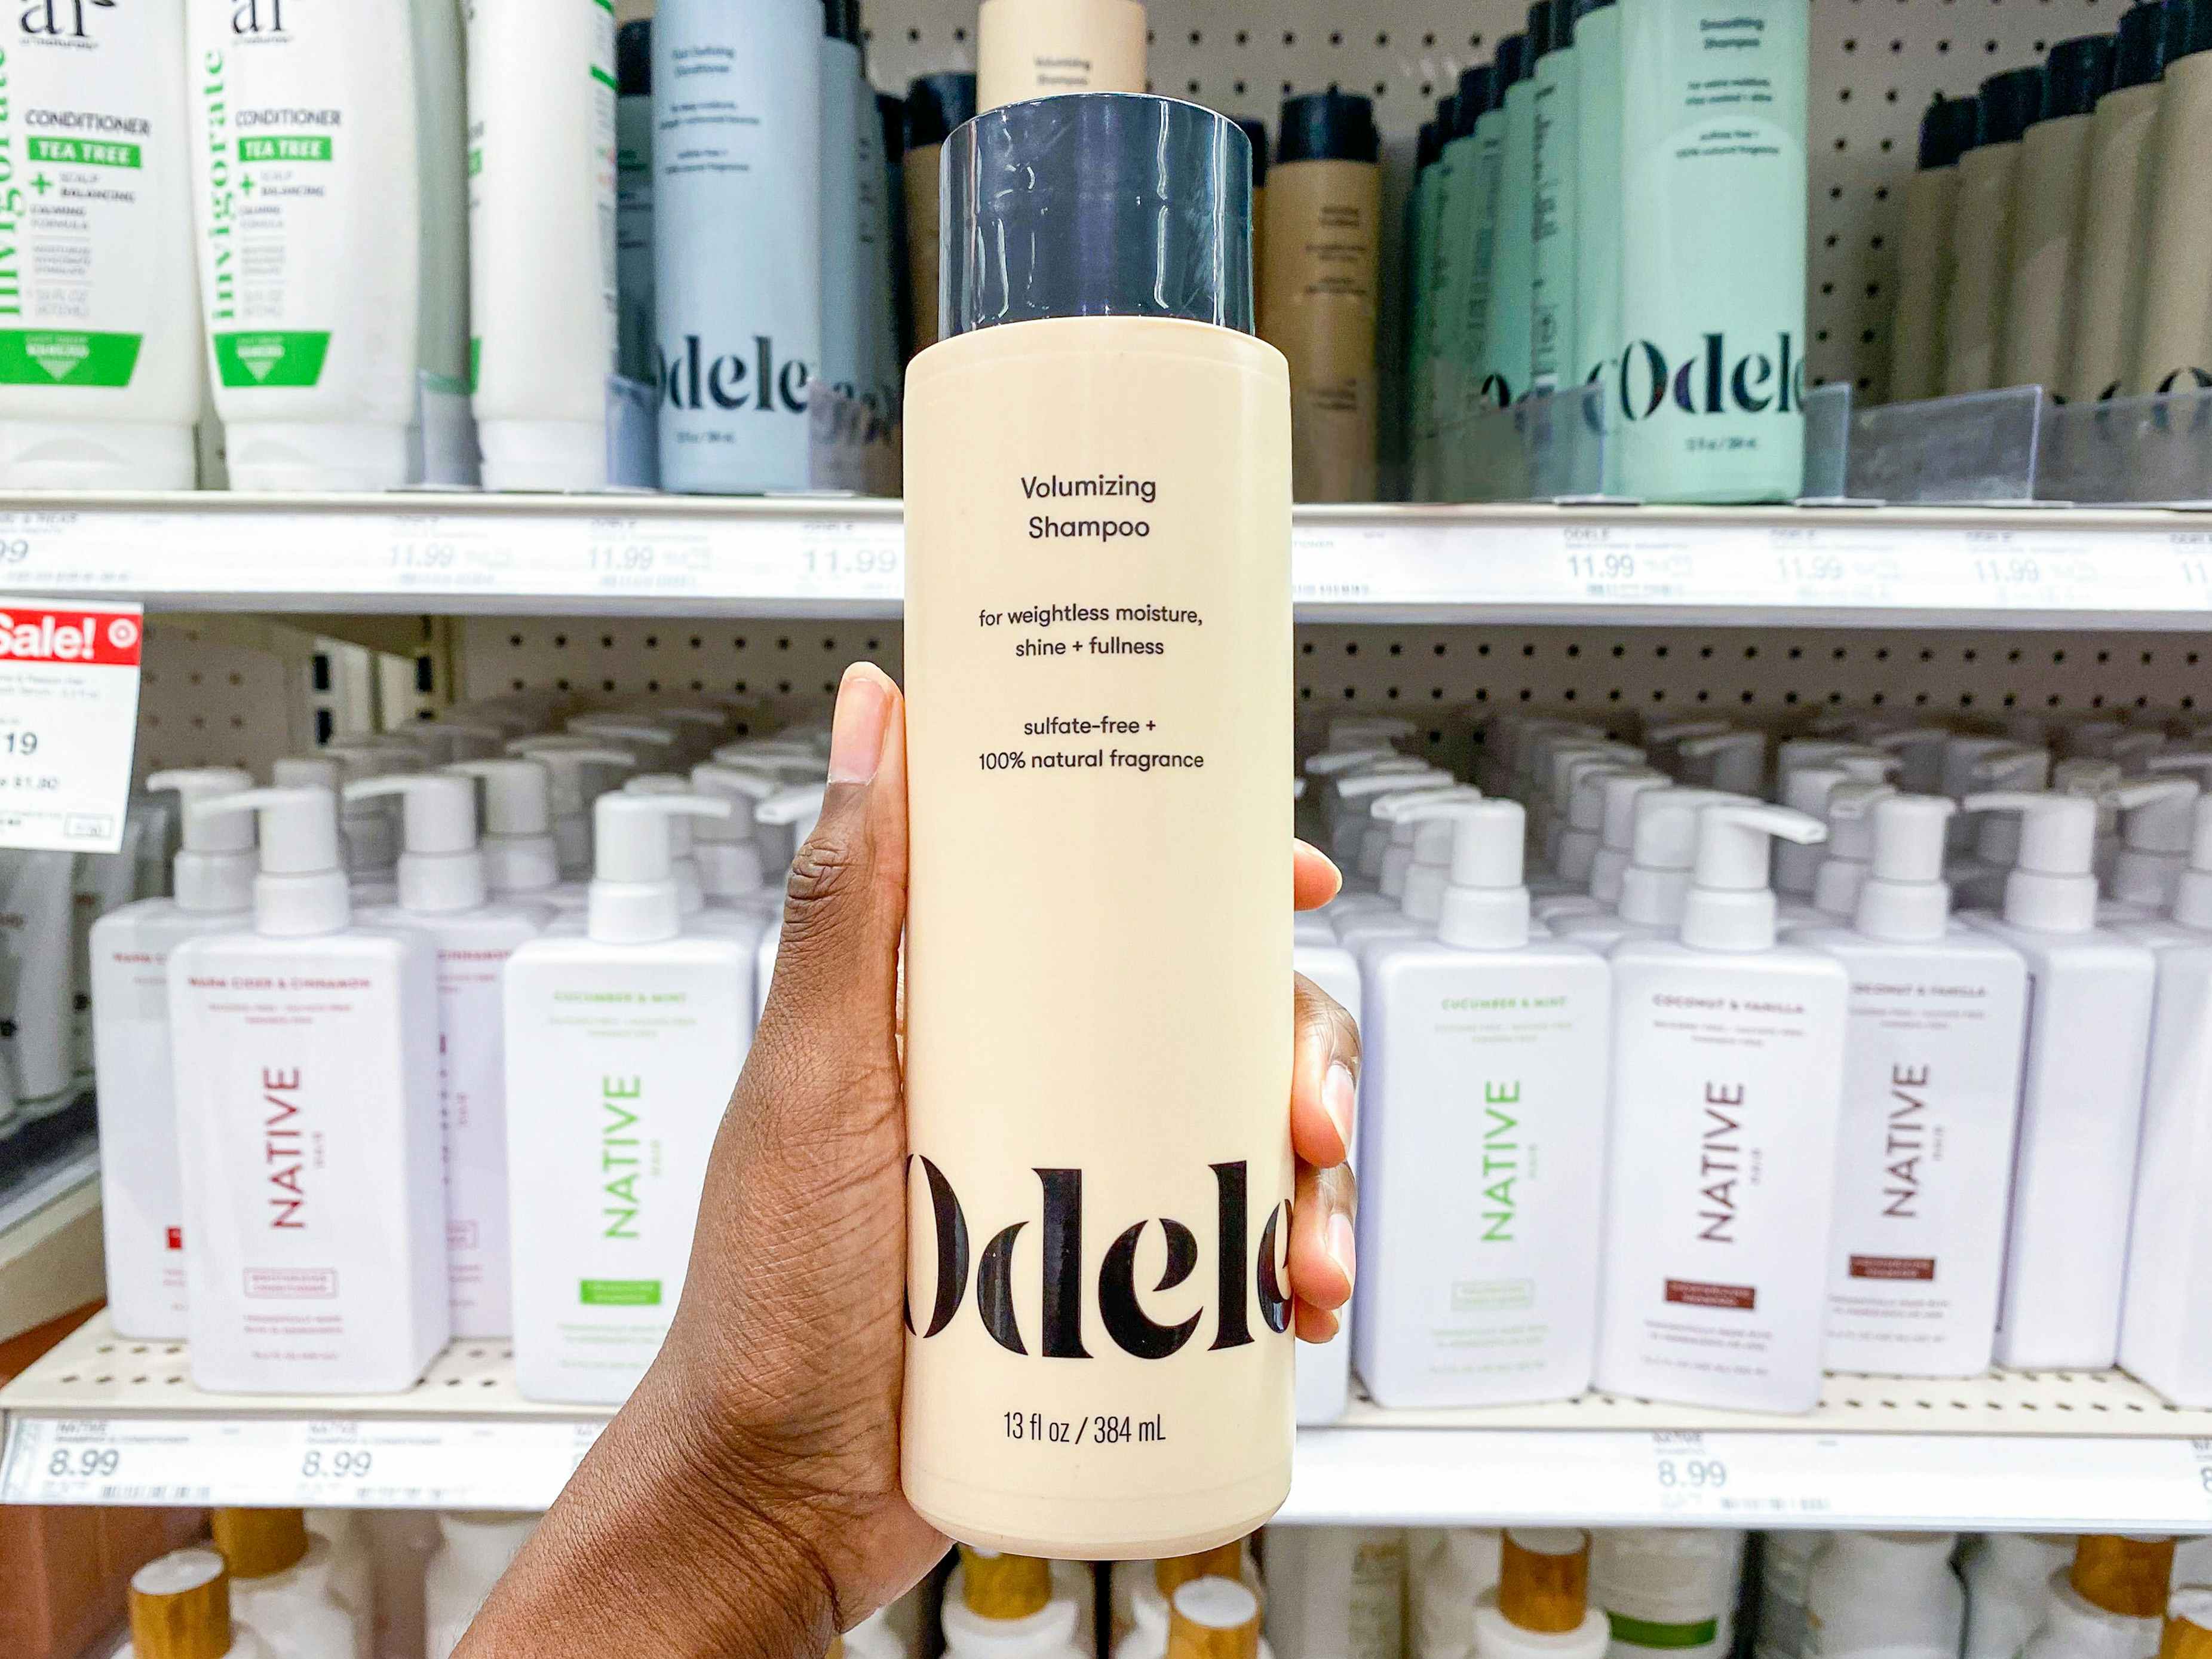 A person's hand holding a bottle of Odele volumizing shampoo in the haircare aisle at Target.